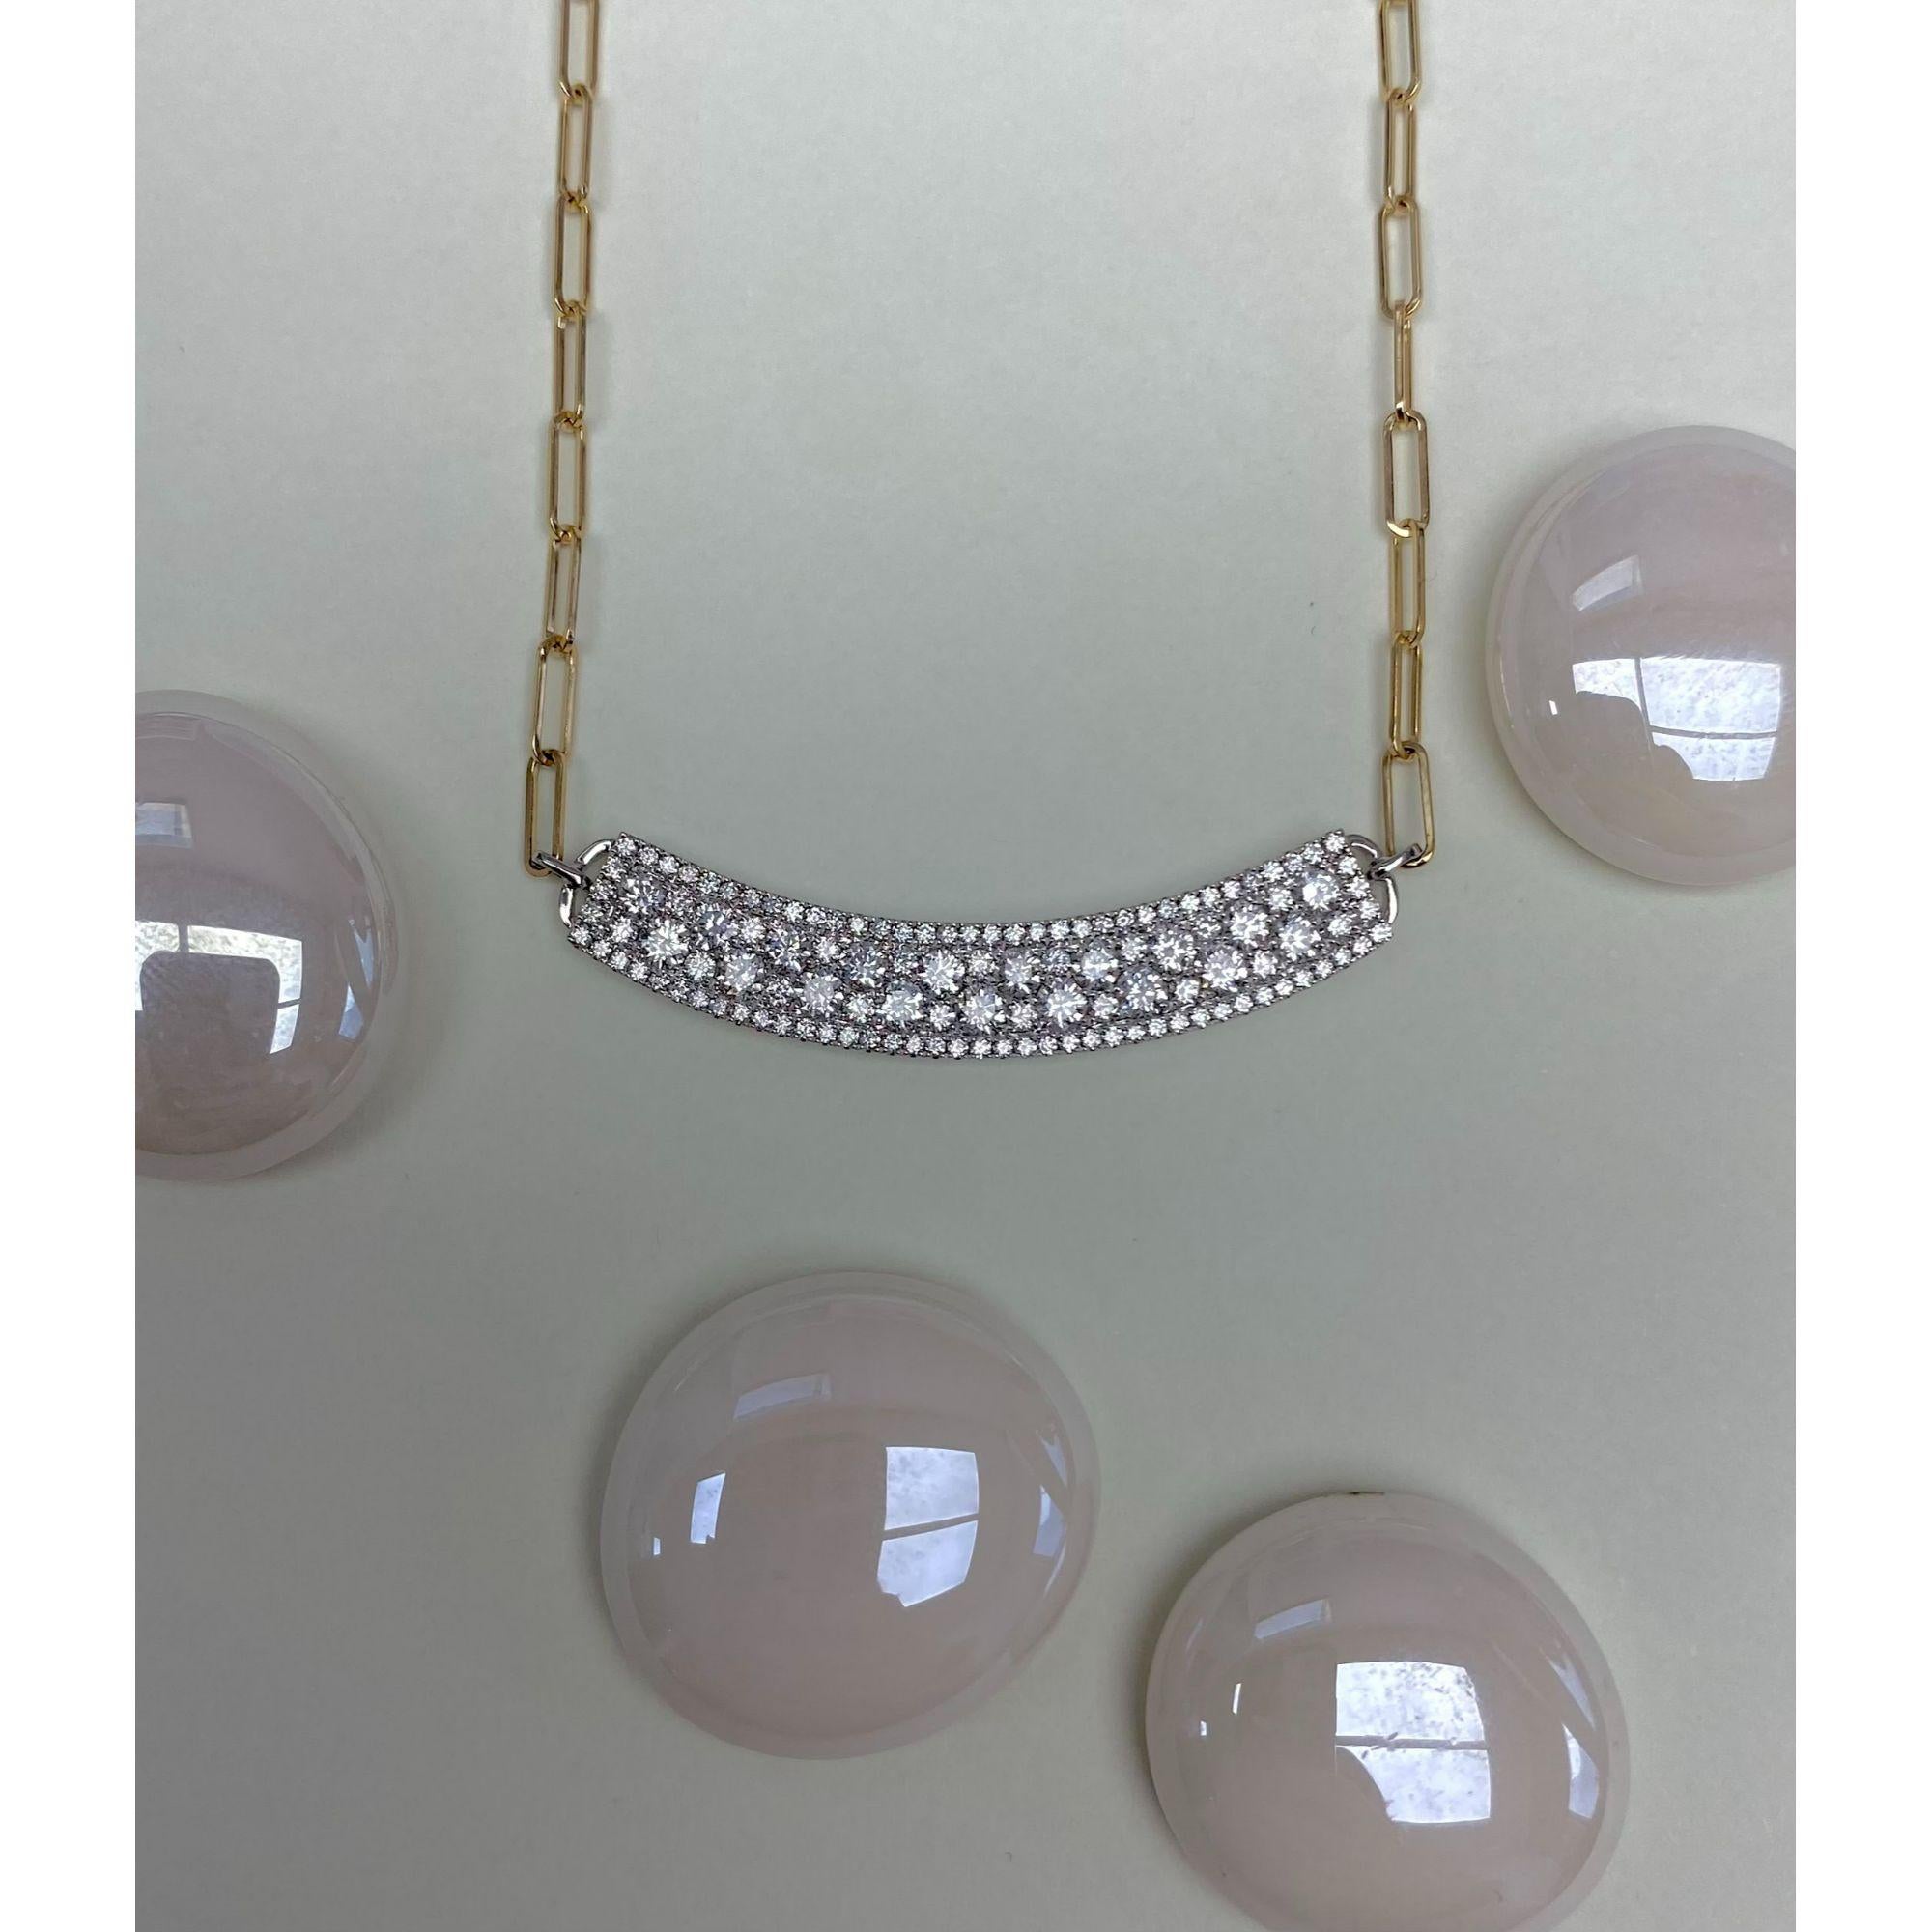 All Diamond Medium Horizontal Linear Curve Pendant With Attached Paperclip Chain, 1.33 Ct, (approximately 38 mm X 6.5 mm)

Available in other metal/ gemstone options: This Diamond pendant can be made in white, pink or yellow gold. 
Matching